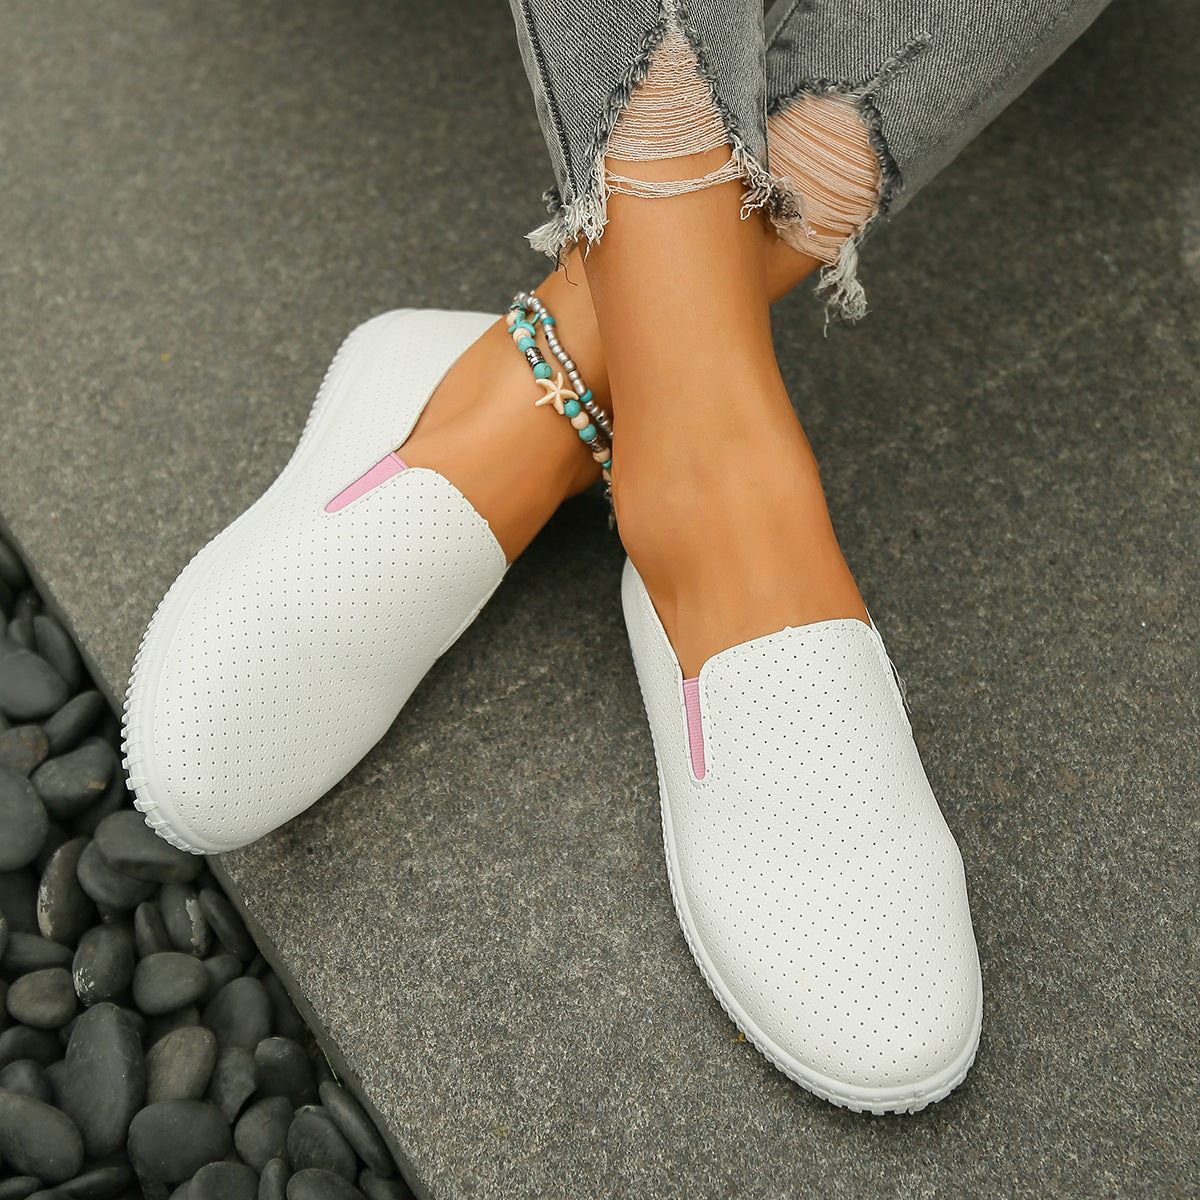 Fashion Hollowed-out Women's Casual Flat Shoes